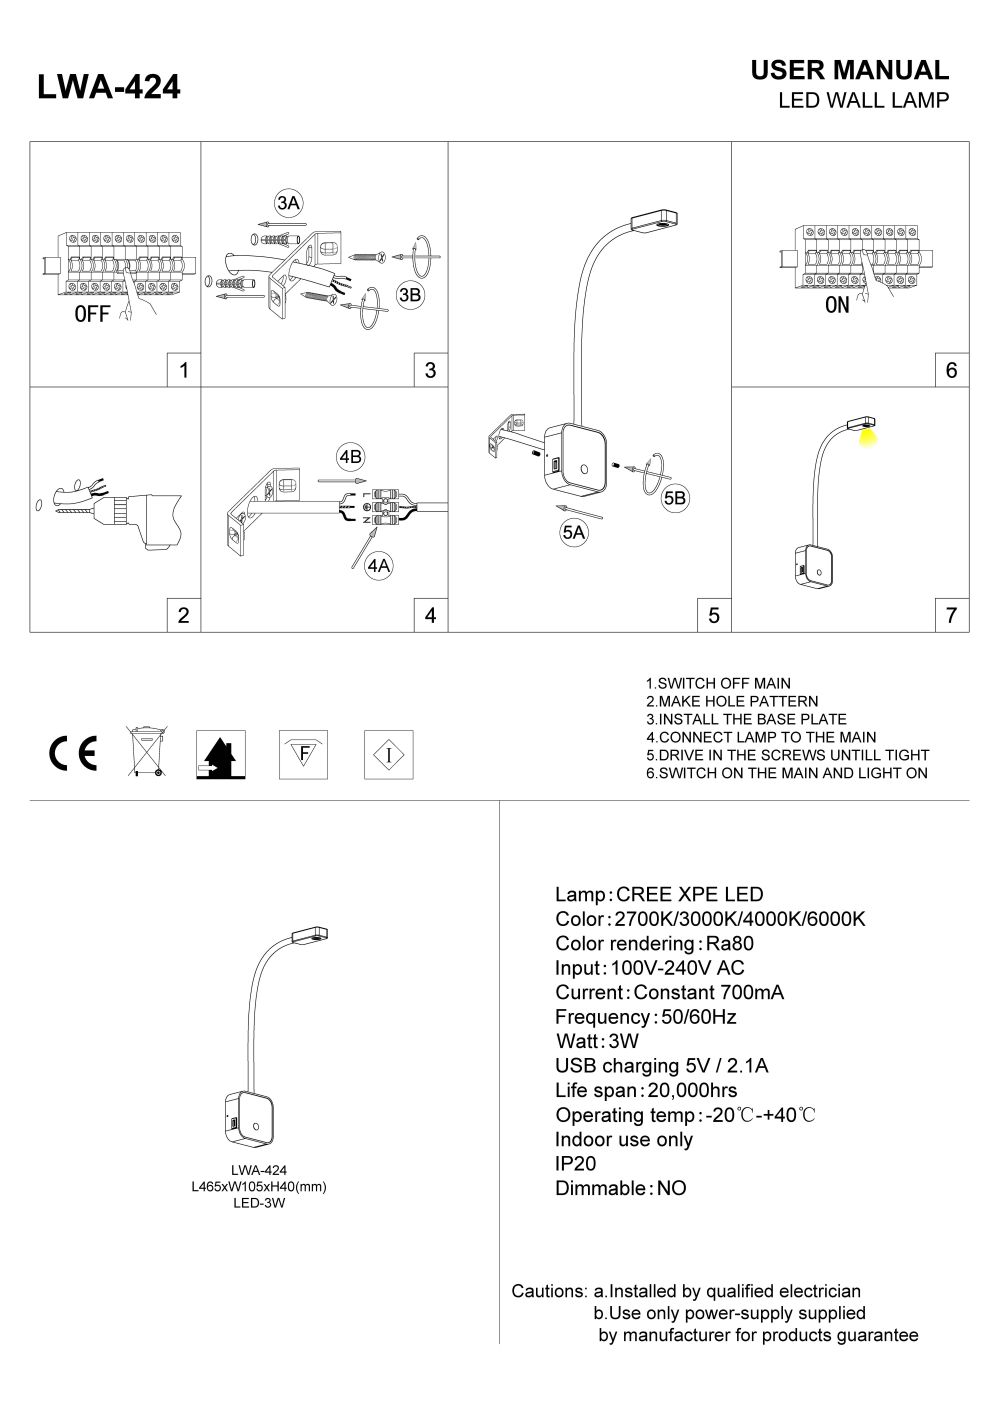 LWA-424 wall mounted LED reading light with USB ports installation guide